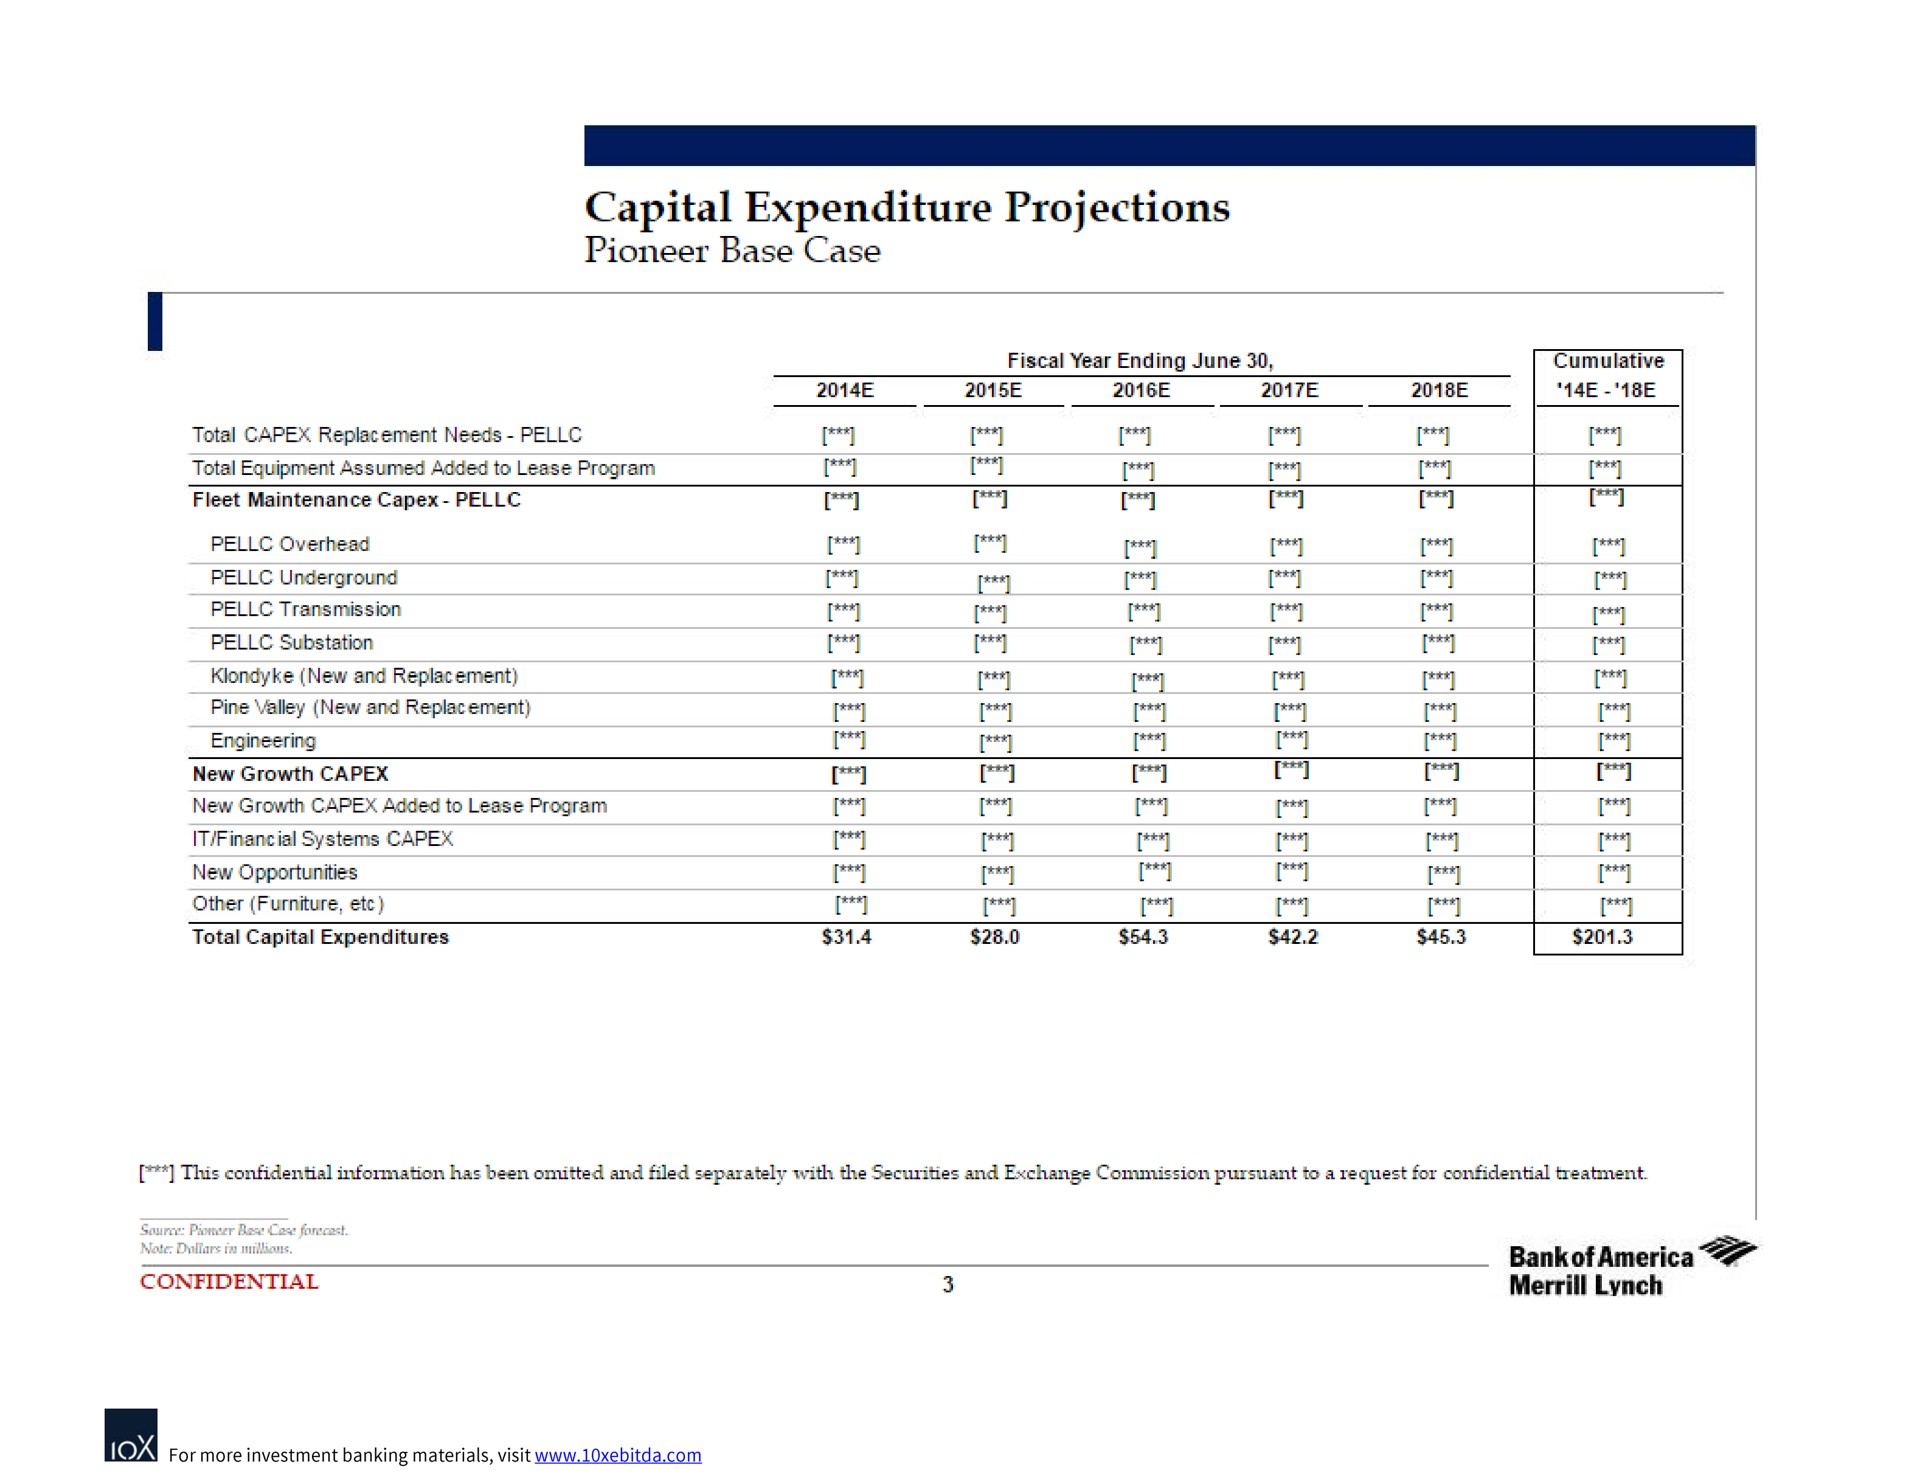 capital expenditure projections pioneer base case total replacement needs substation systems a tee confidential | Bank of America